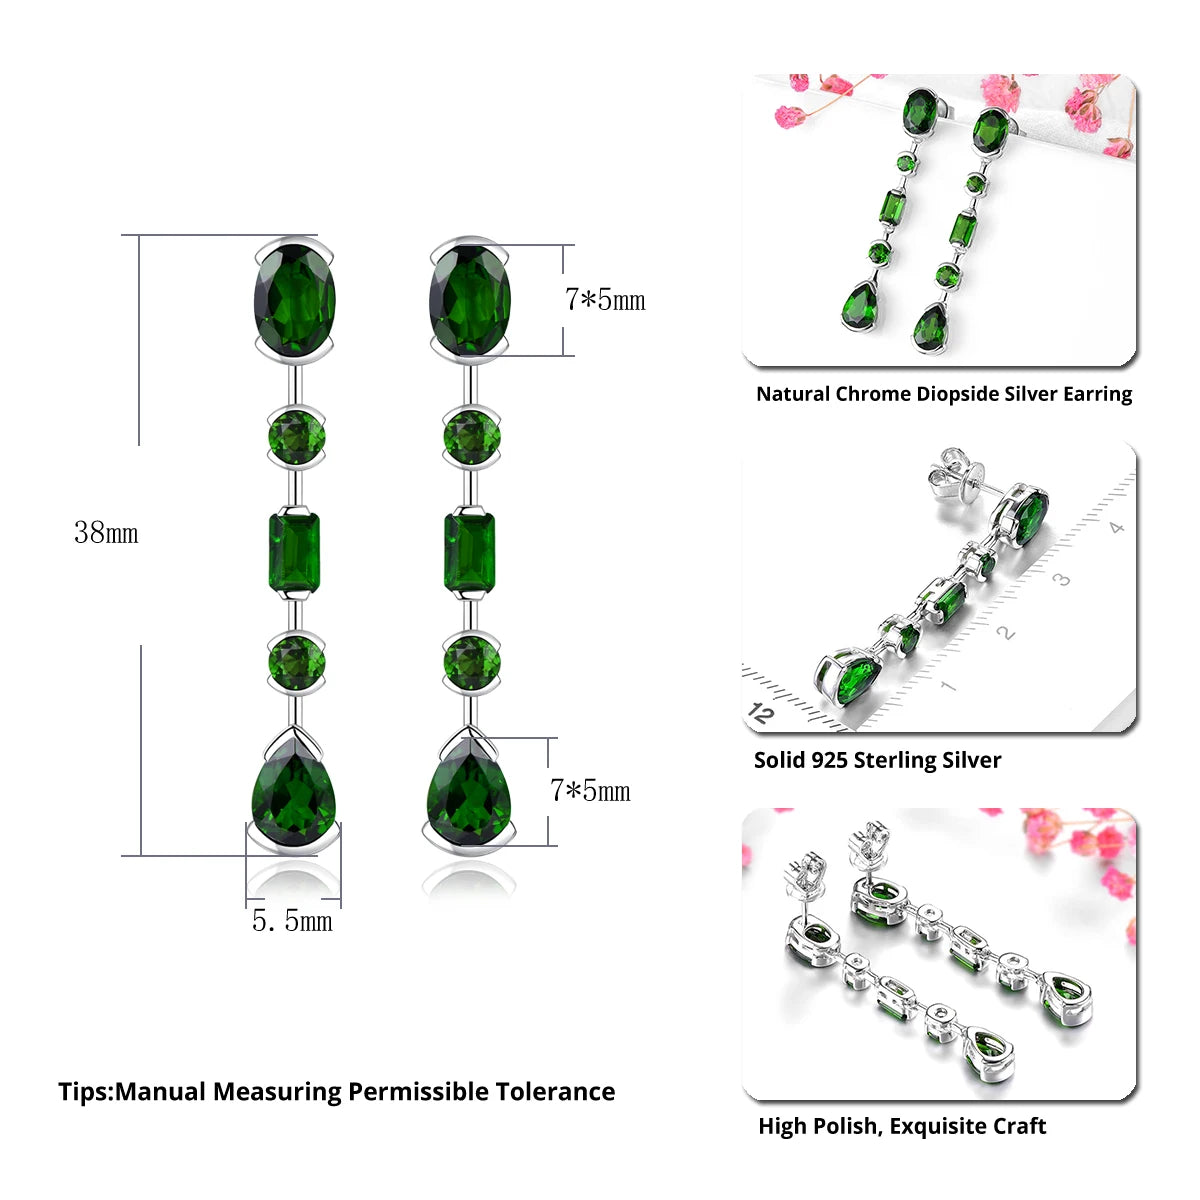 Natural Chrome Diopside Sterling Silver Drop Earrings 3.5 Carats Genuine Gemstone Exquisite Top Quality Women Birthday Gifts